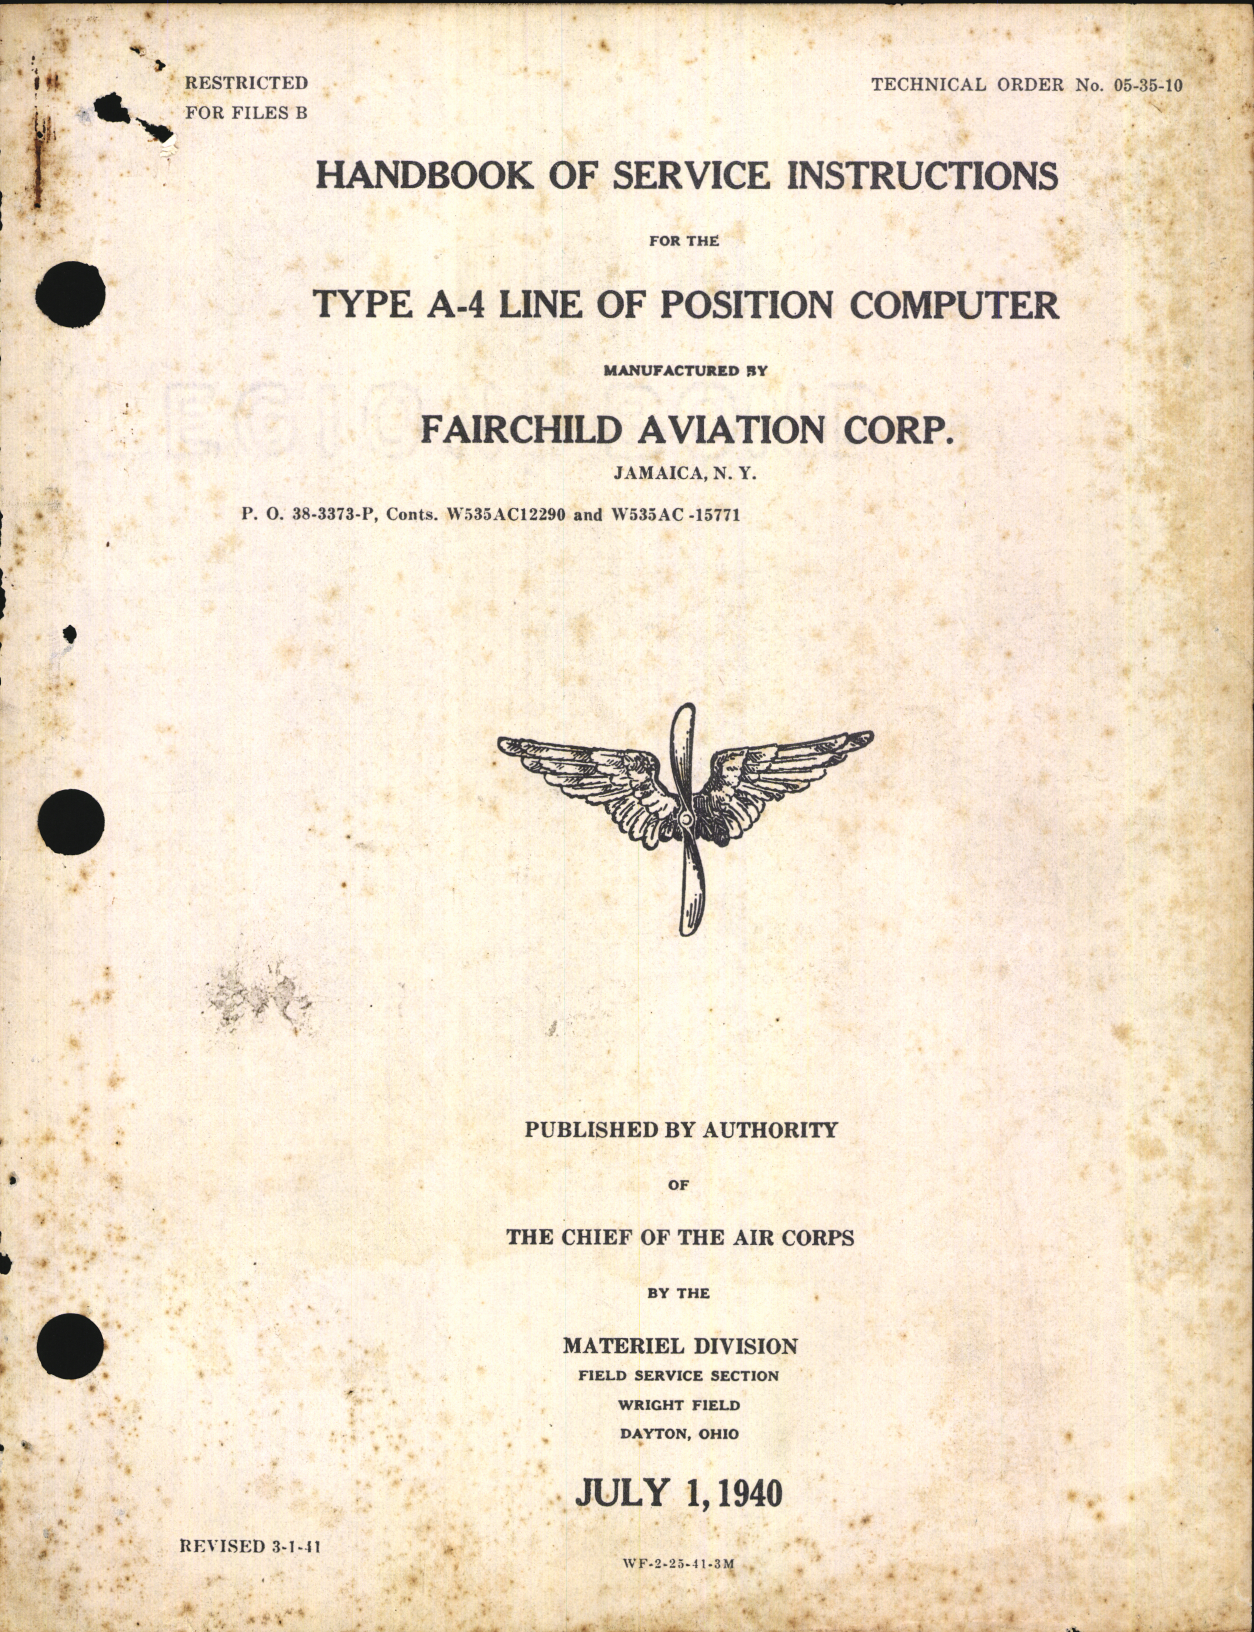 Sample page 1 from AirCorps Library document: Service Instructions for Type A-4 Line of Position Computer